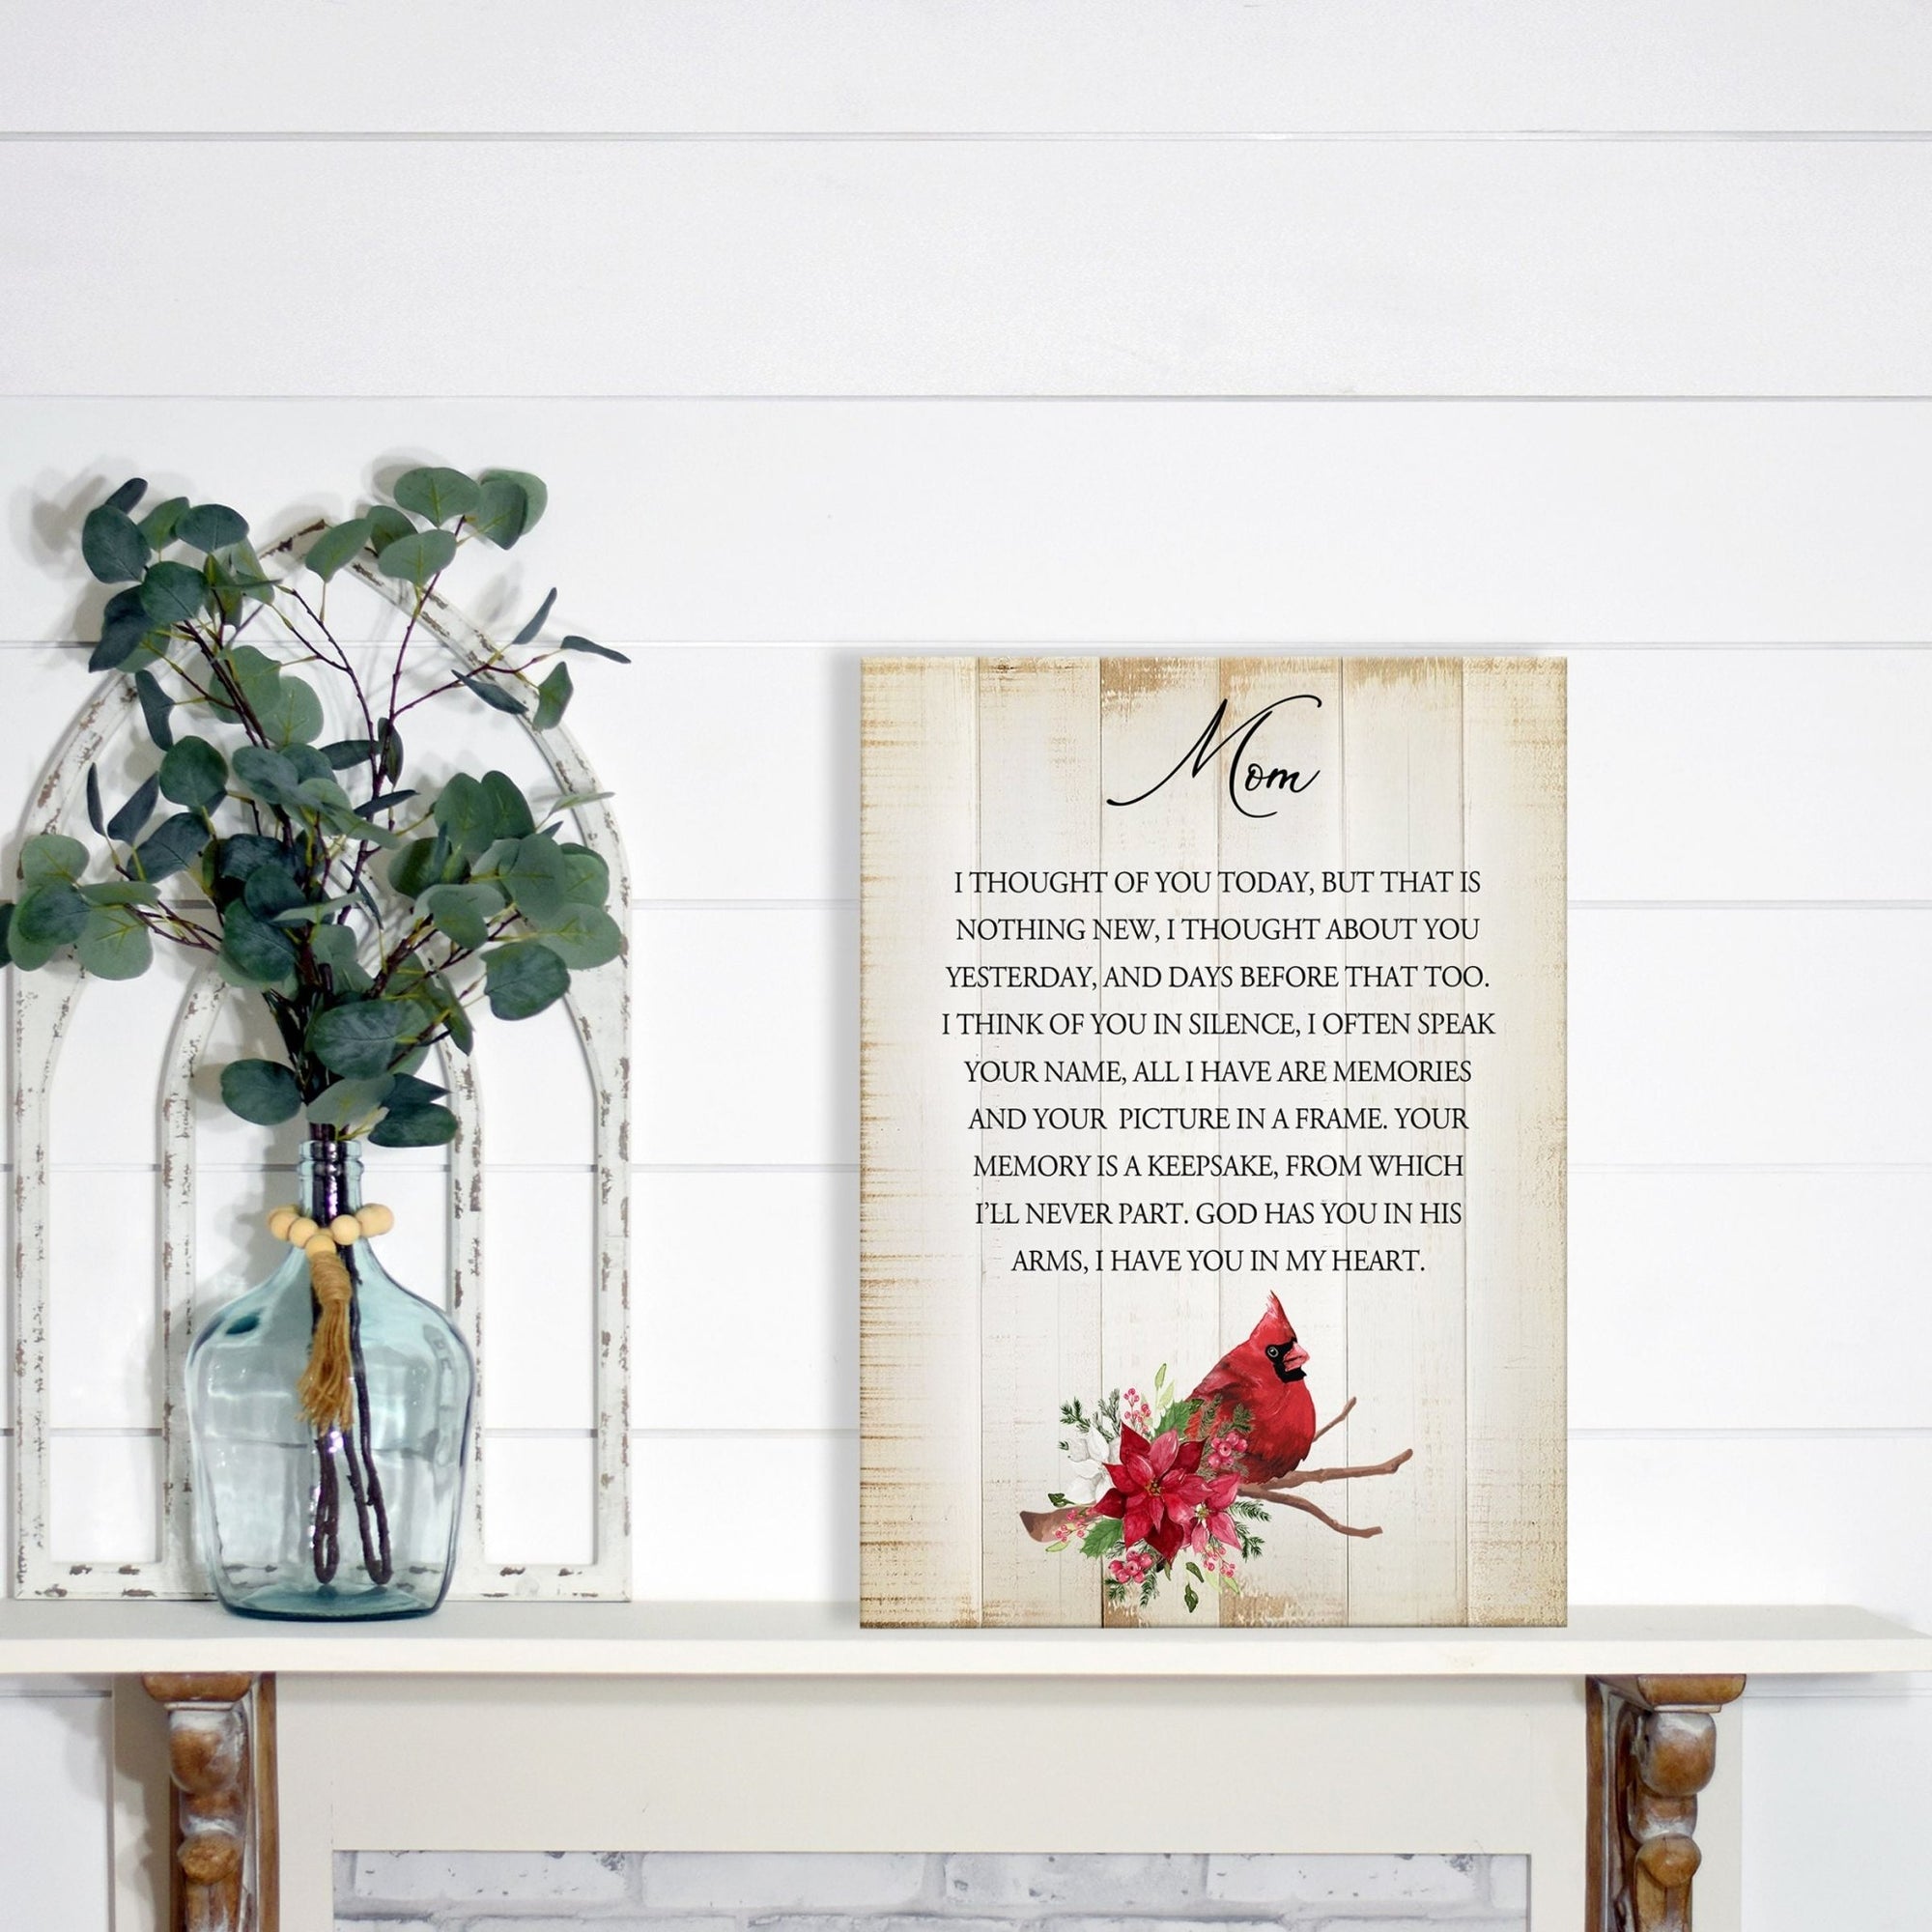 Wooden memorial decor to commemorate a loved one.